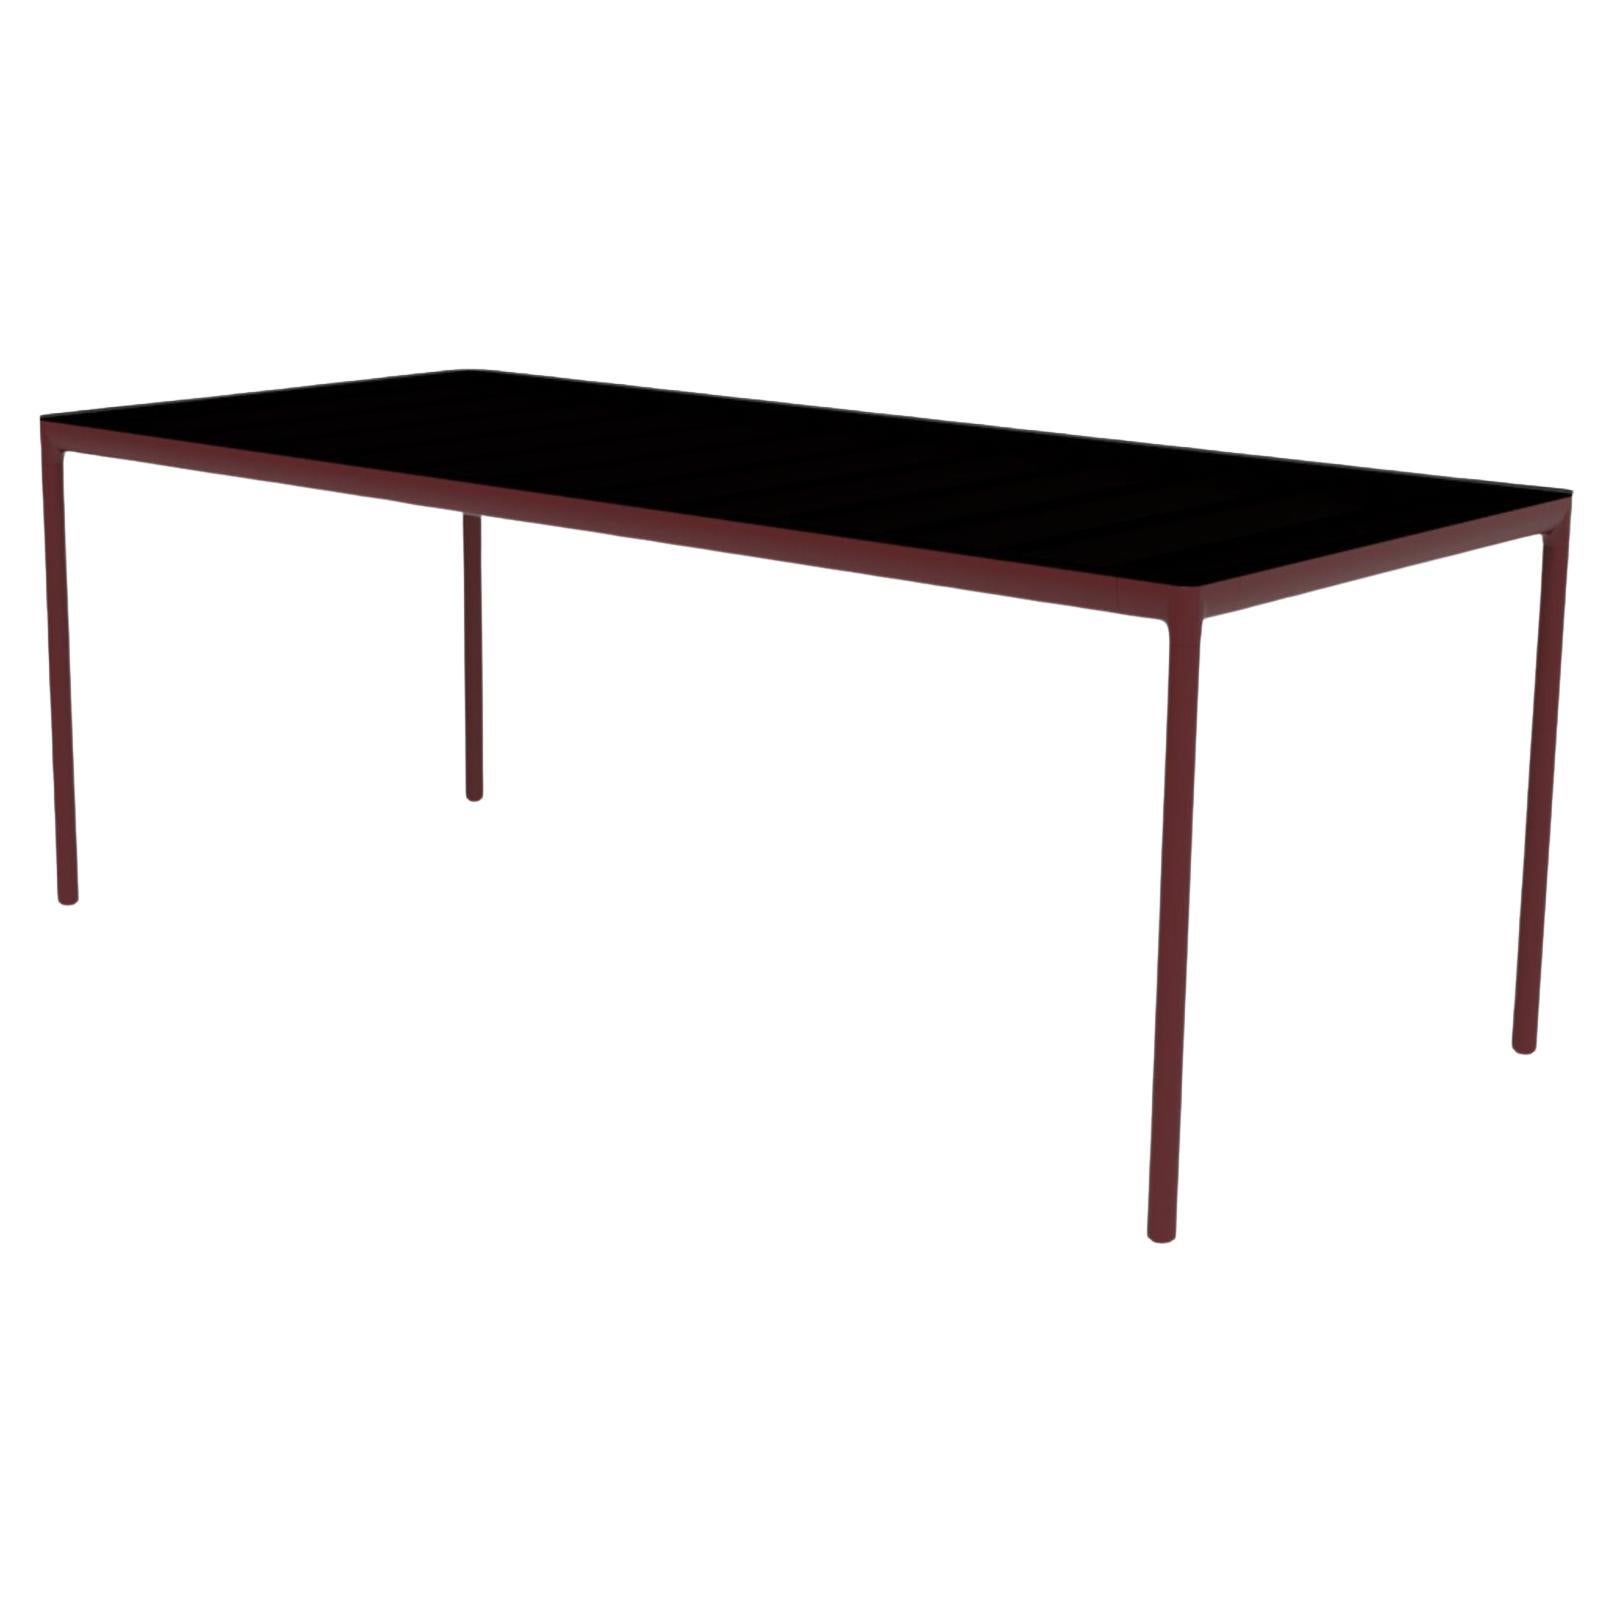 Ribbons Burgundy 200 Coffee Table by Mowee For Sale